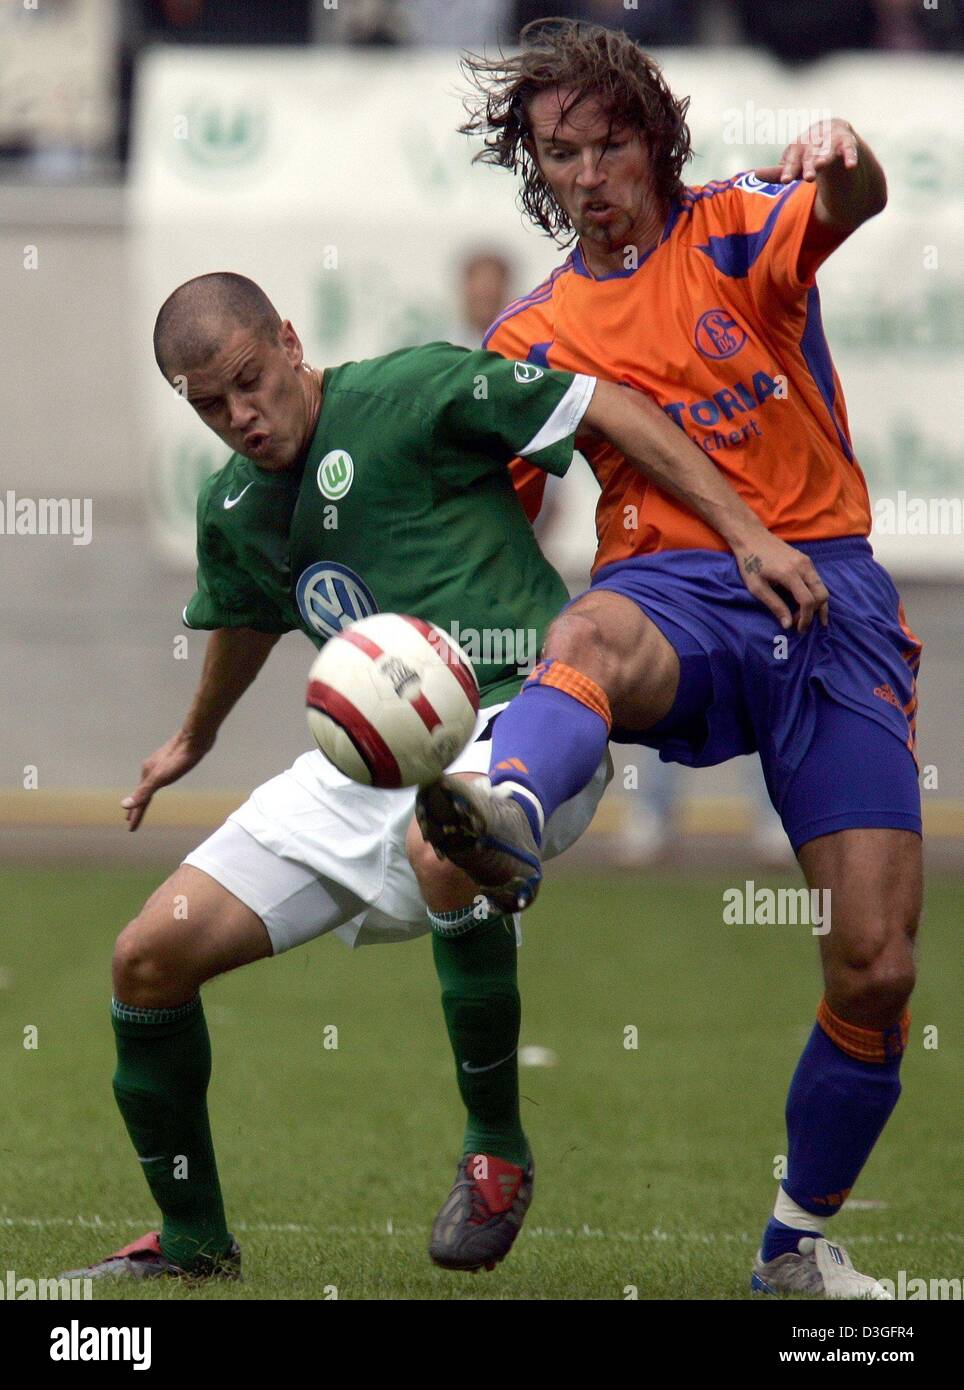 (dpa) - Schalke midfielder Sven Vermant (R) fights for the ball with Wolfsburg midfield mastermind Andres D'Alessandro during a league match at the Volkswagen Arena in Wolfsburg, Germany, 11 September 2004. Wolfsburg won 3-0. Stock Photo